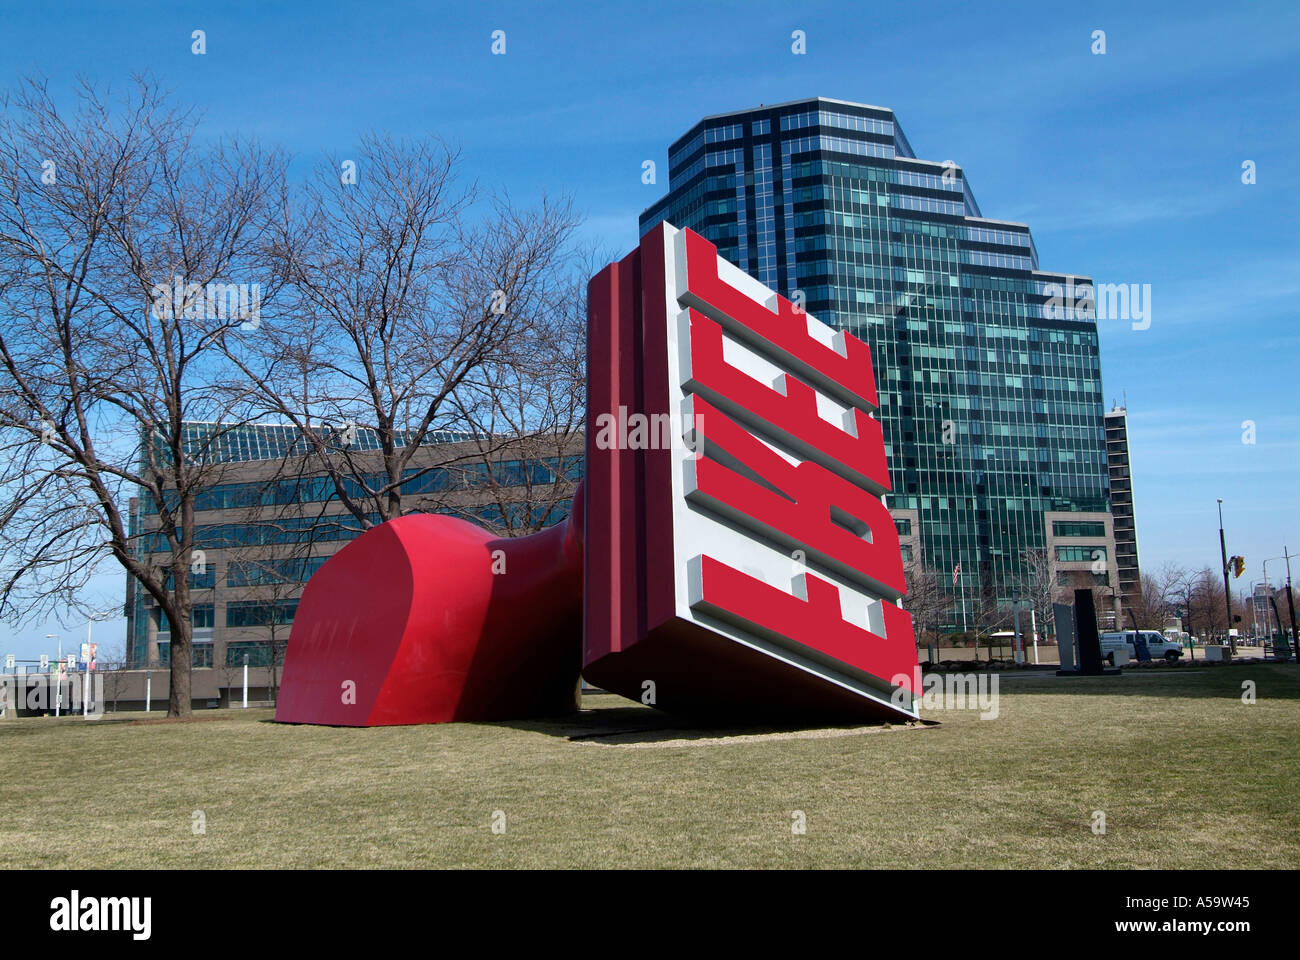 Rubber Stamp Sculpture Downtown Cleveland Ohio sightseeing landmarks and tourist attractions Stock Photo